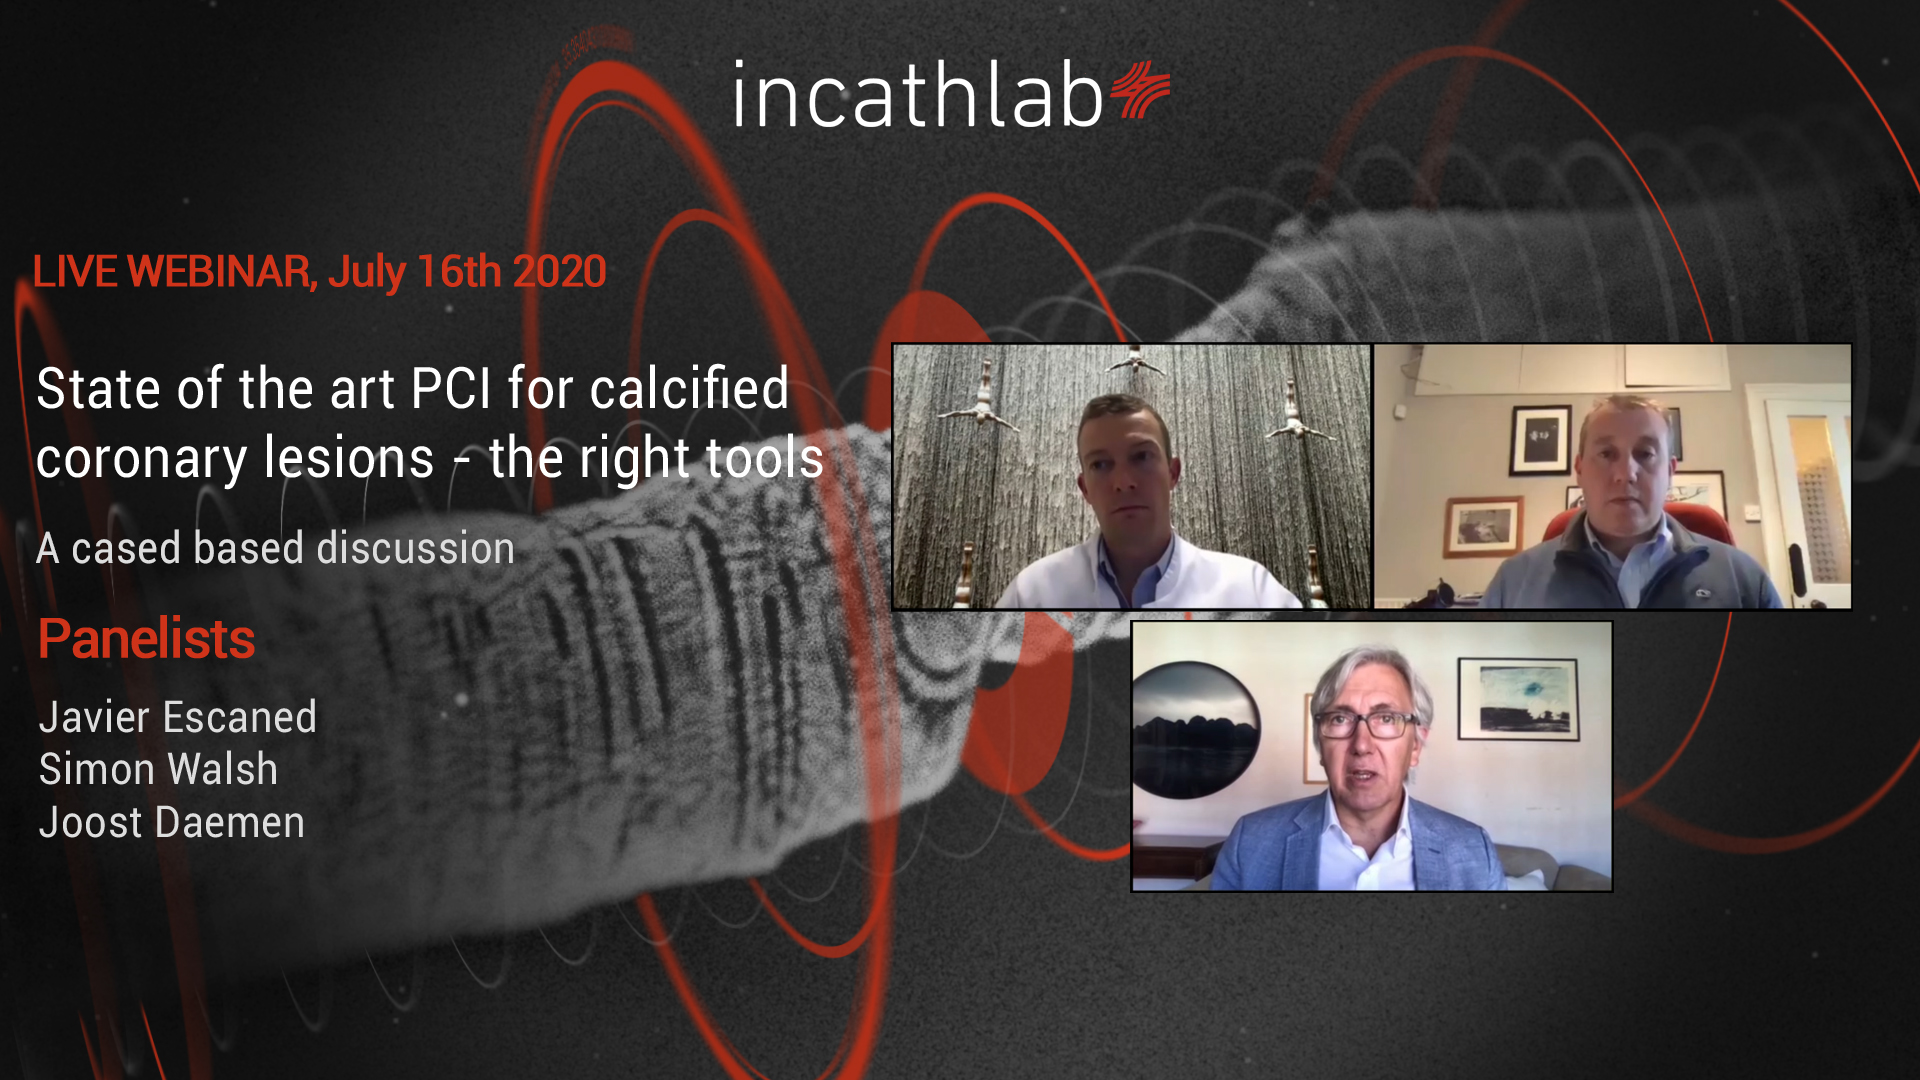 State of the art PCI for calcified coronary lesions - the right tools